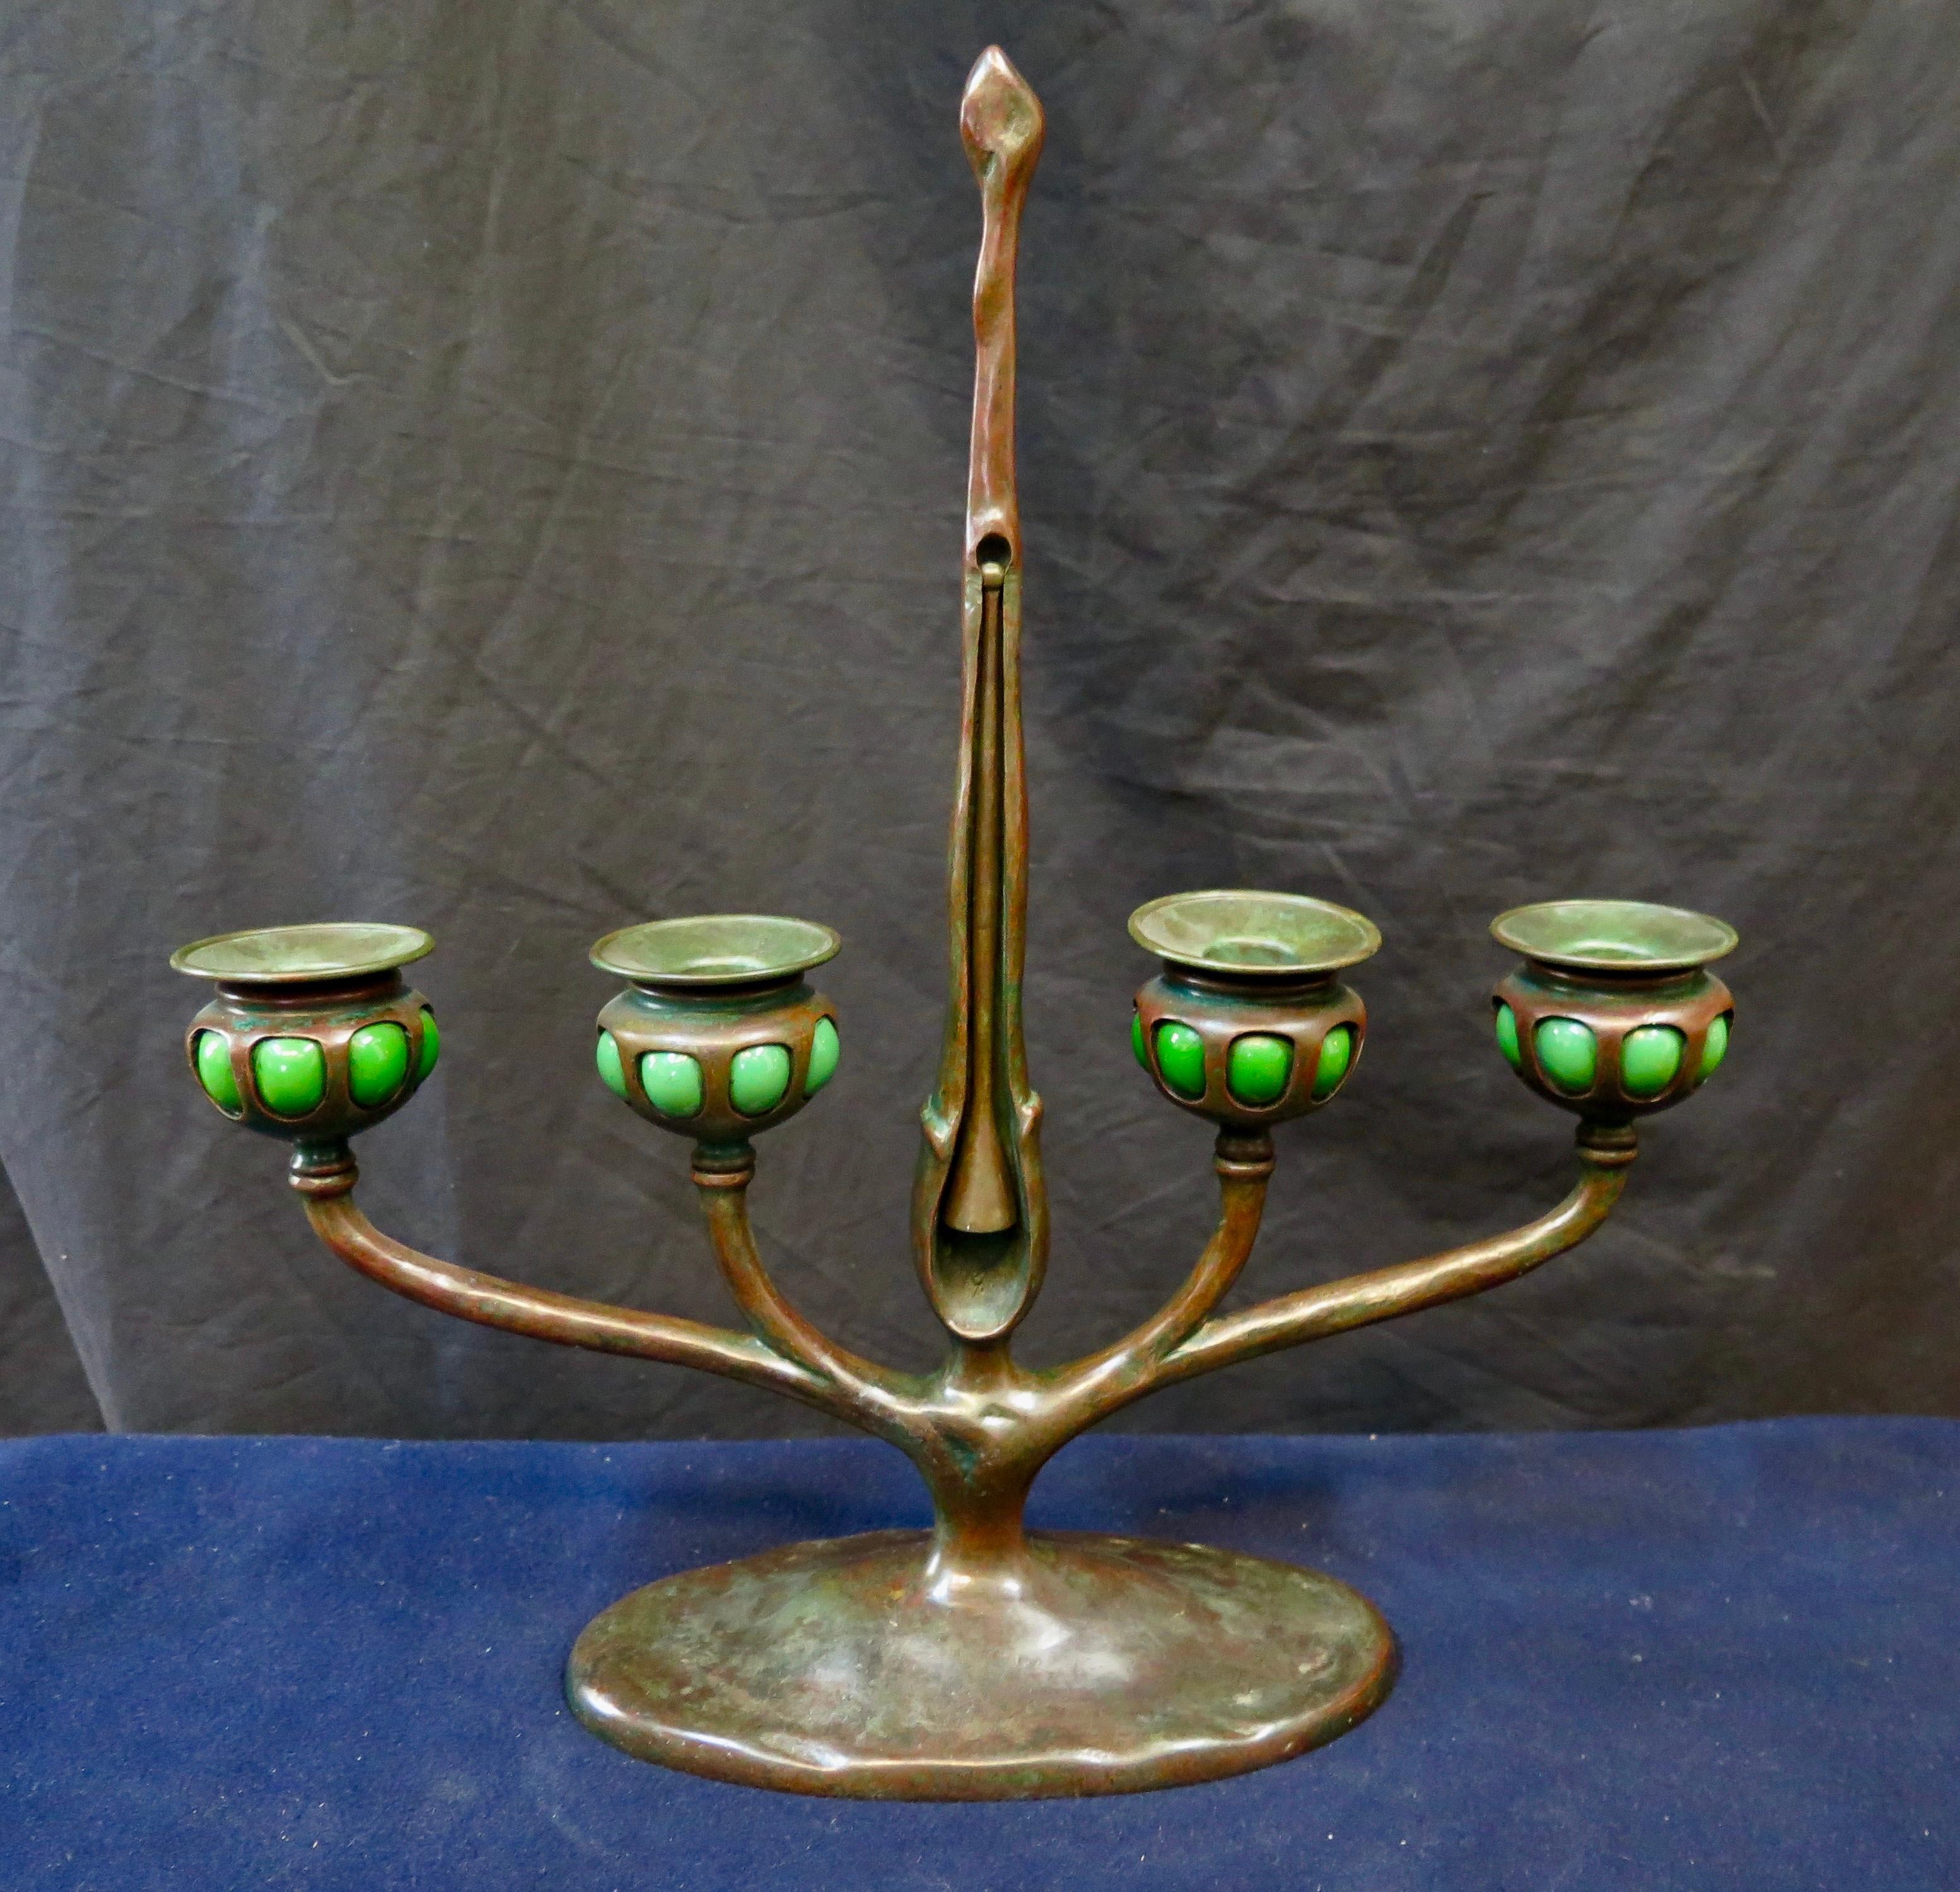 Tiffany Studios Four Place Candelabra with Blown Out Green Glass Candleholders In Good Condition For Sale In Bronx, NY